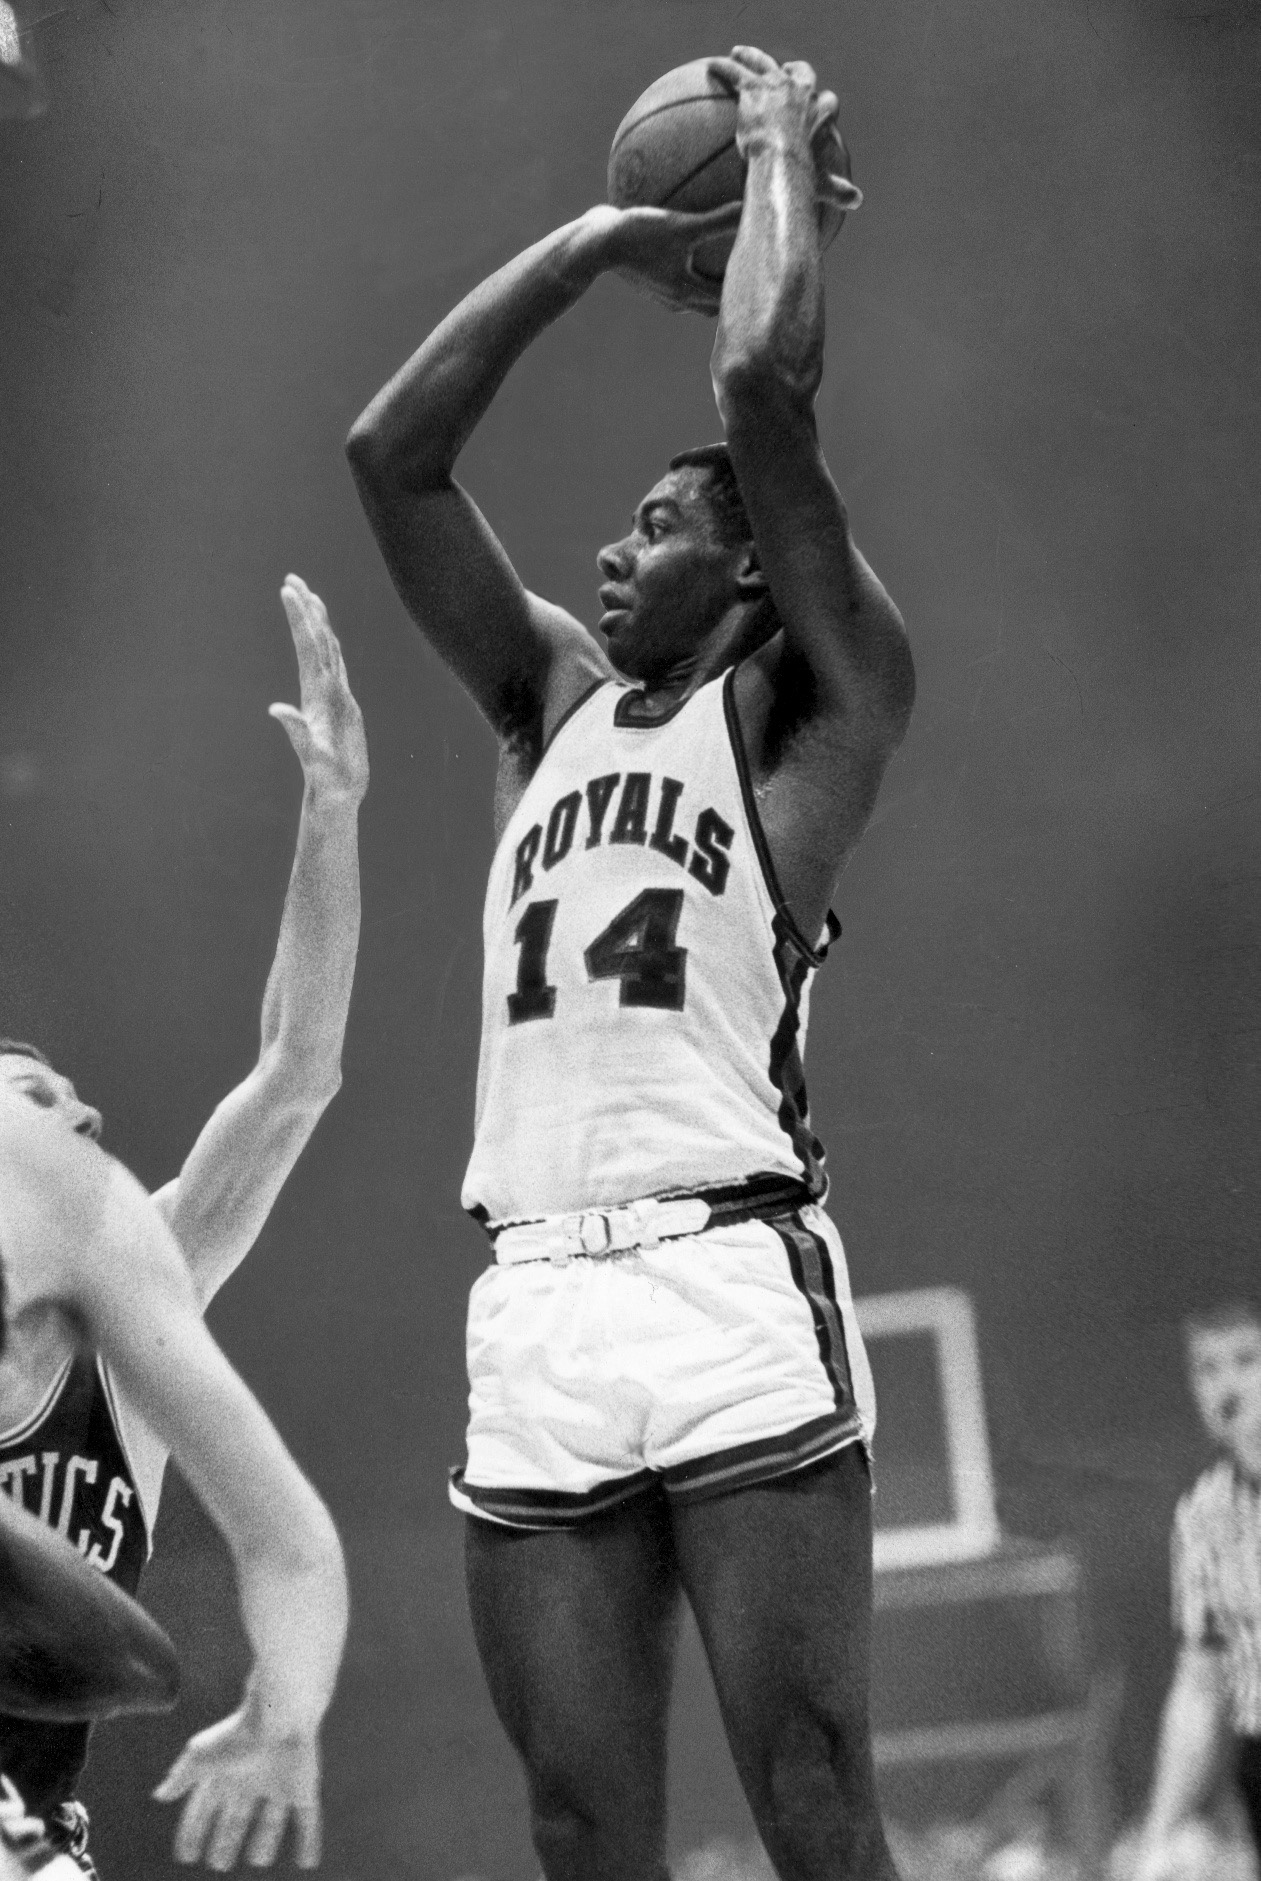 This is a photo of Oscar Robertson in his 1966 season with the Cincinnati Royals.